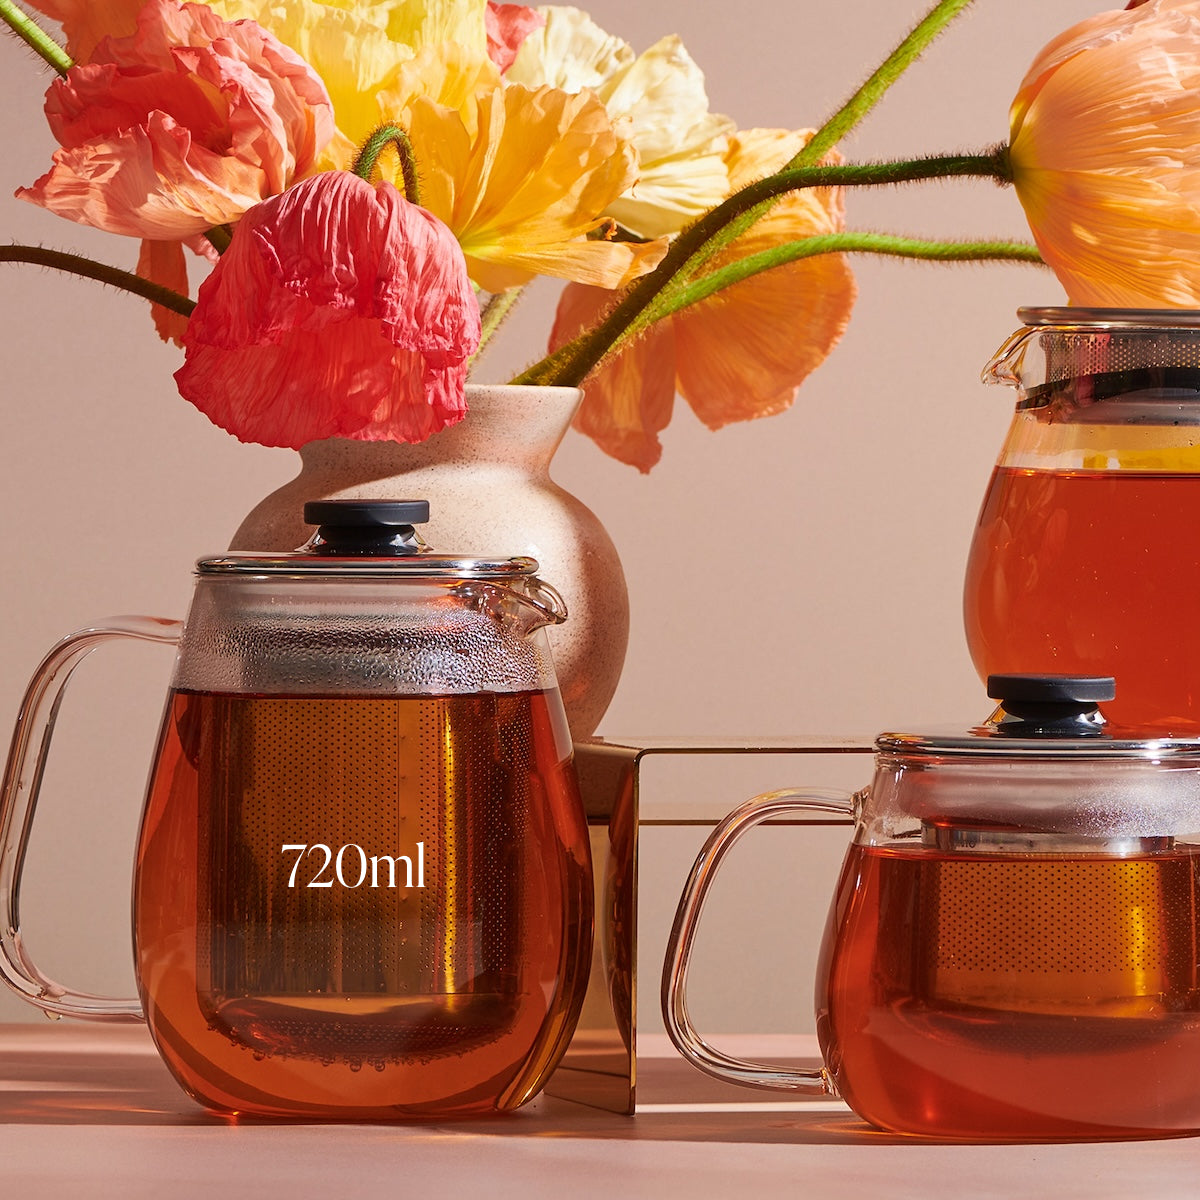 Glass teapots filled with amber-colored Magic Hour Kinto Stainless Steel Teapot are displayed. The largest teapot, labeled "720ml," sits on the left with another teapot to the right on a metal stand. Bright flowers in a vase are in the background, adding a colorful contrast.